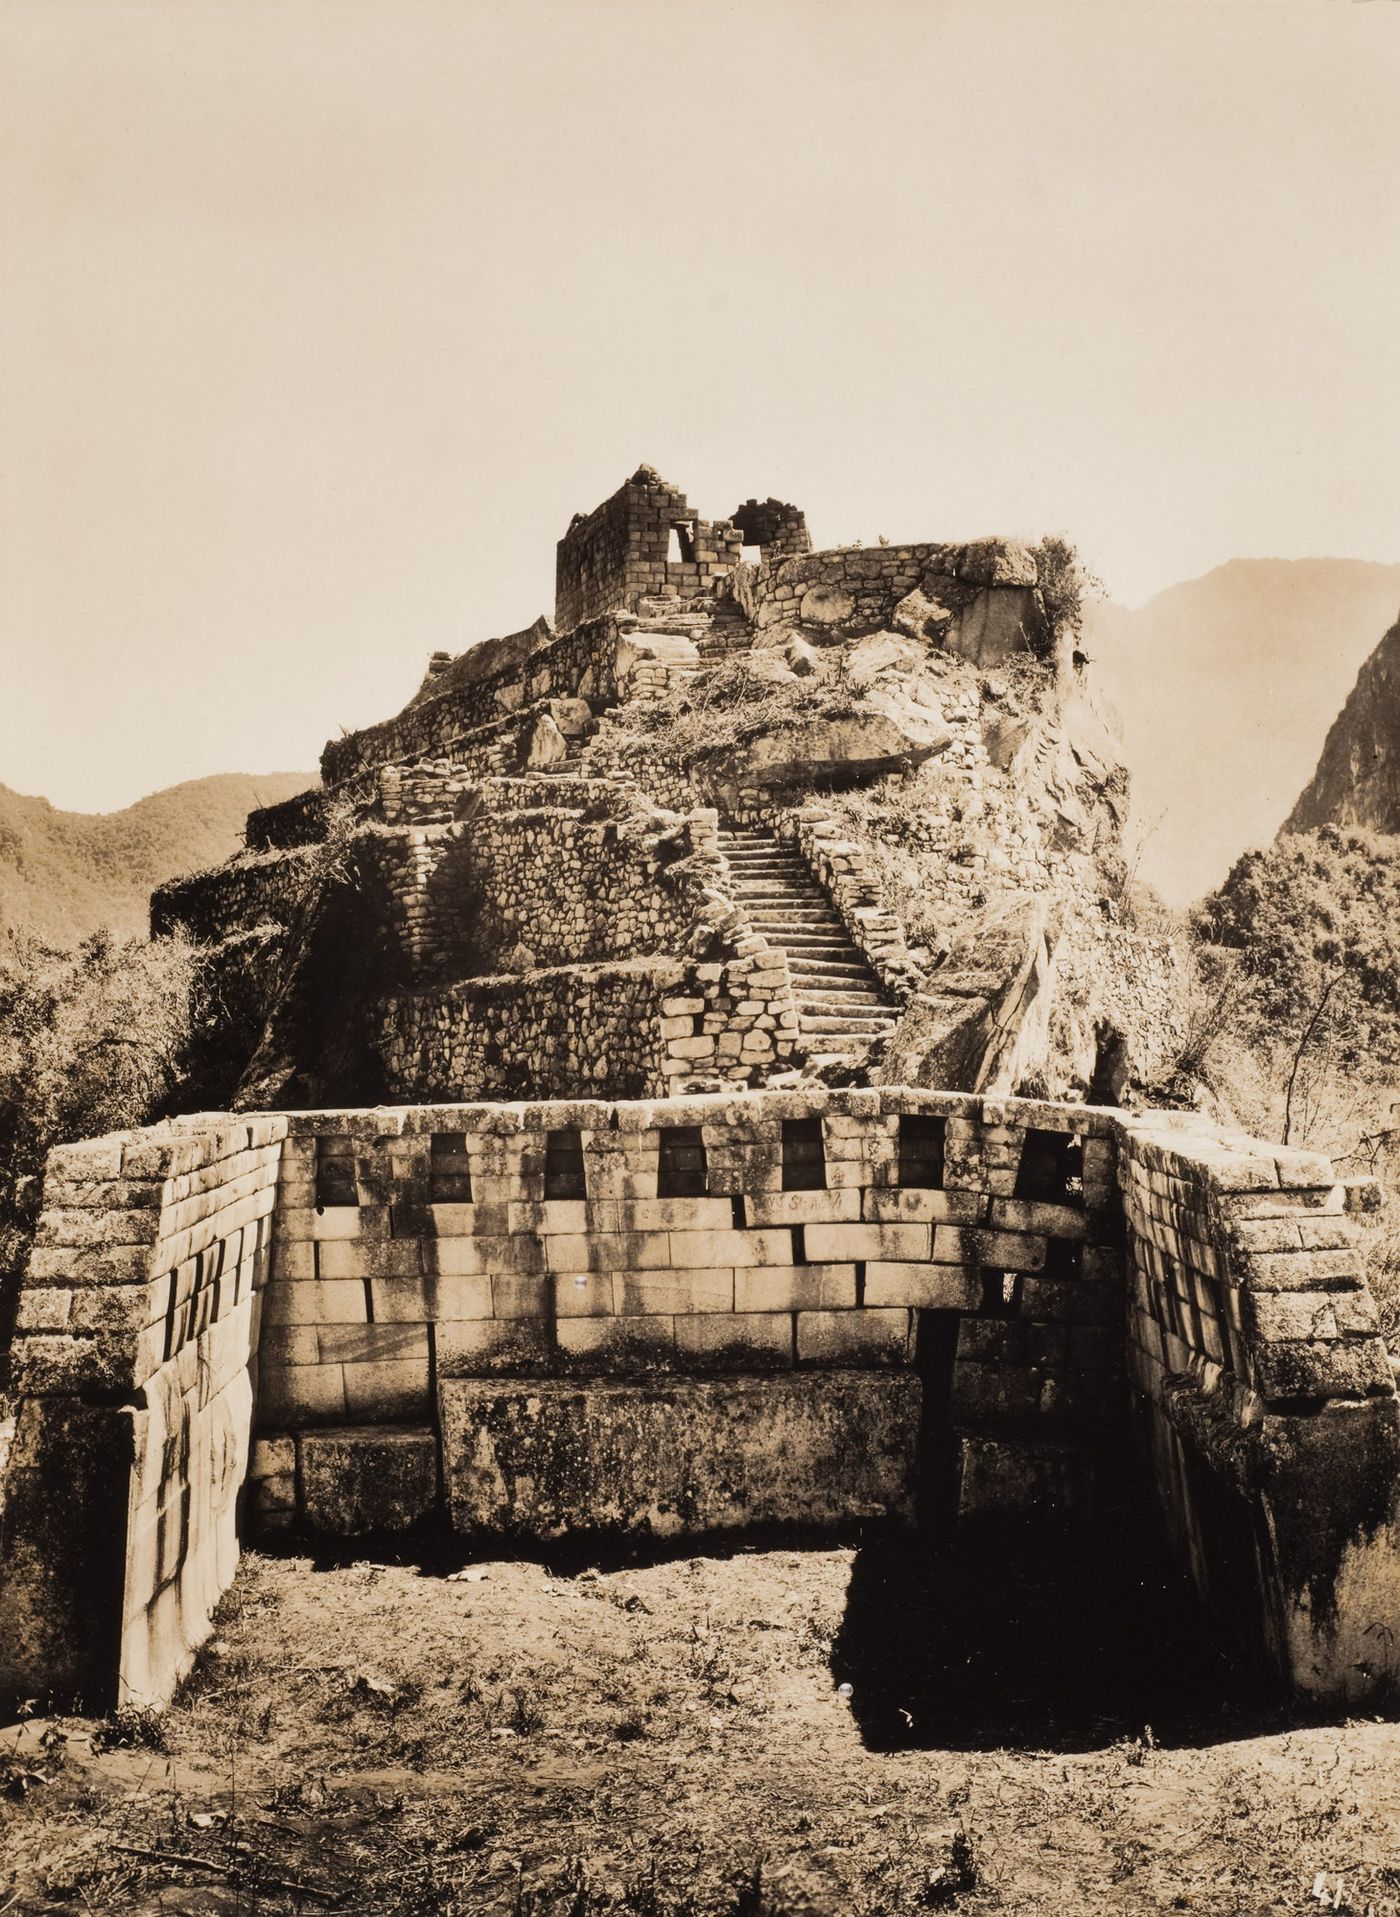 View of the Principal Temple with Intihuatana Hill and the Little Temple in the background, Sacred Plaza, Machu Picchu, Peru